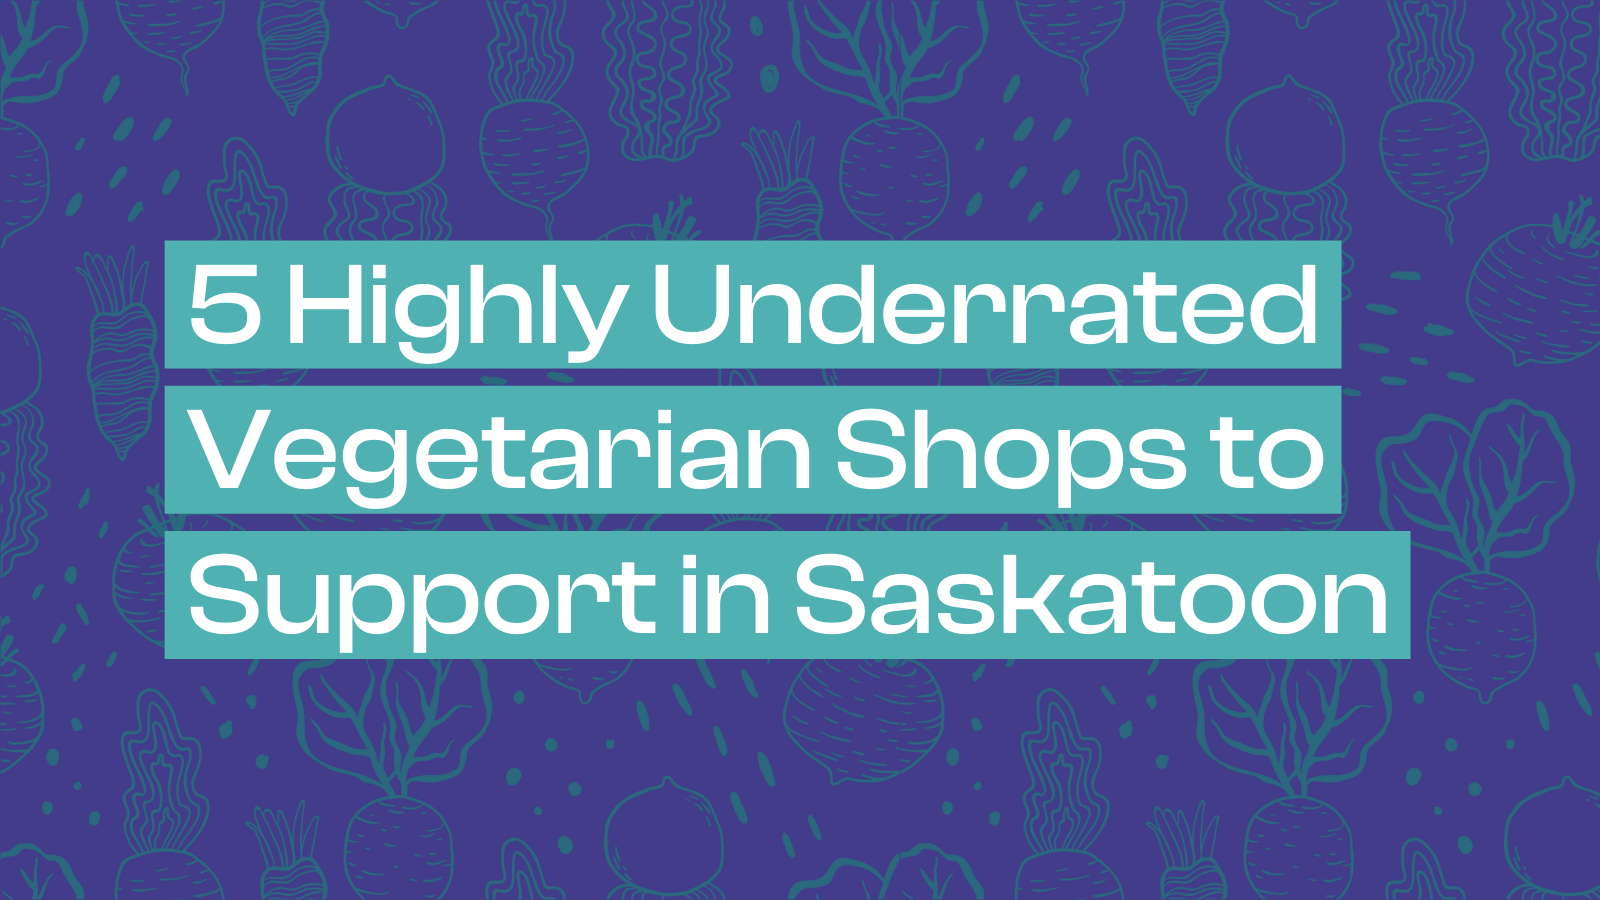 5 Highly Underrated Vegetarian Shops to Support in Saskatoon